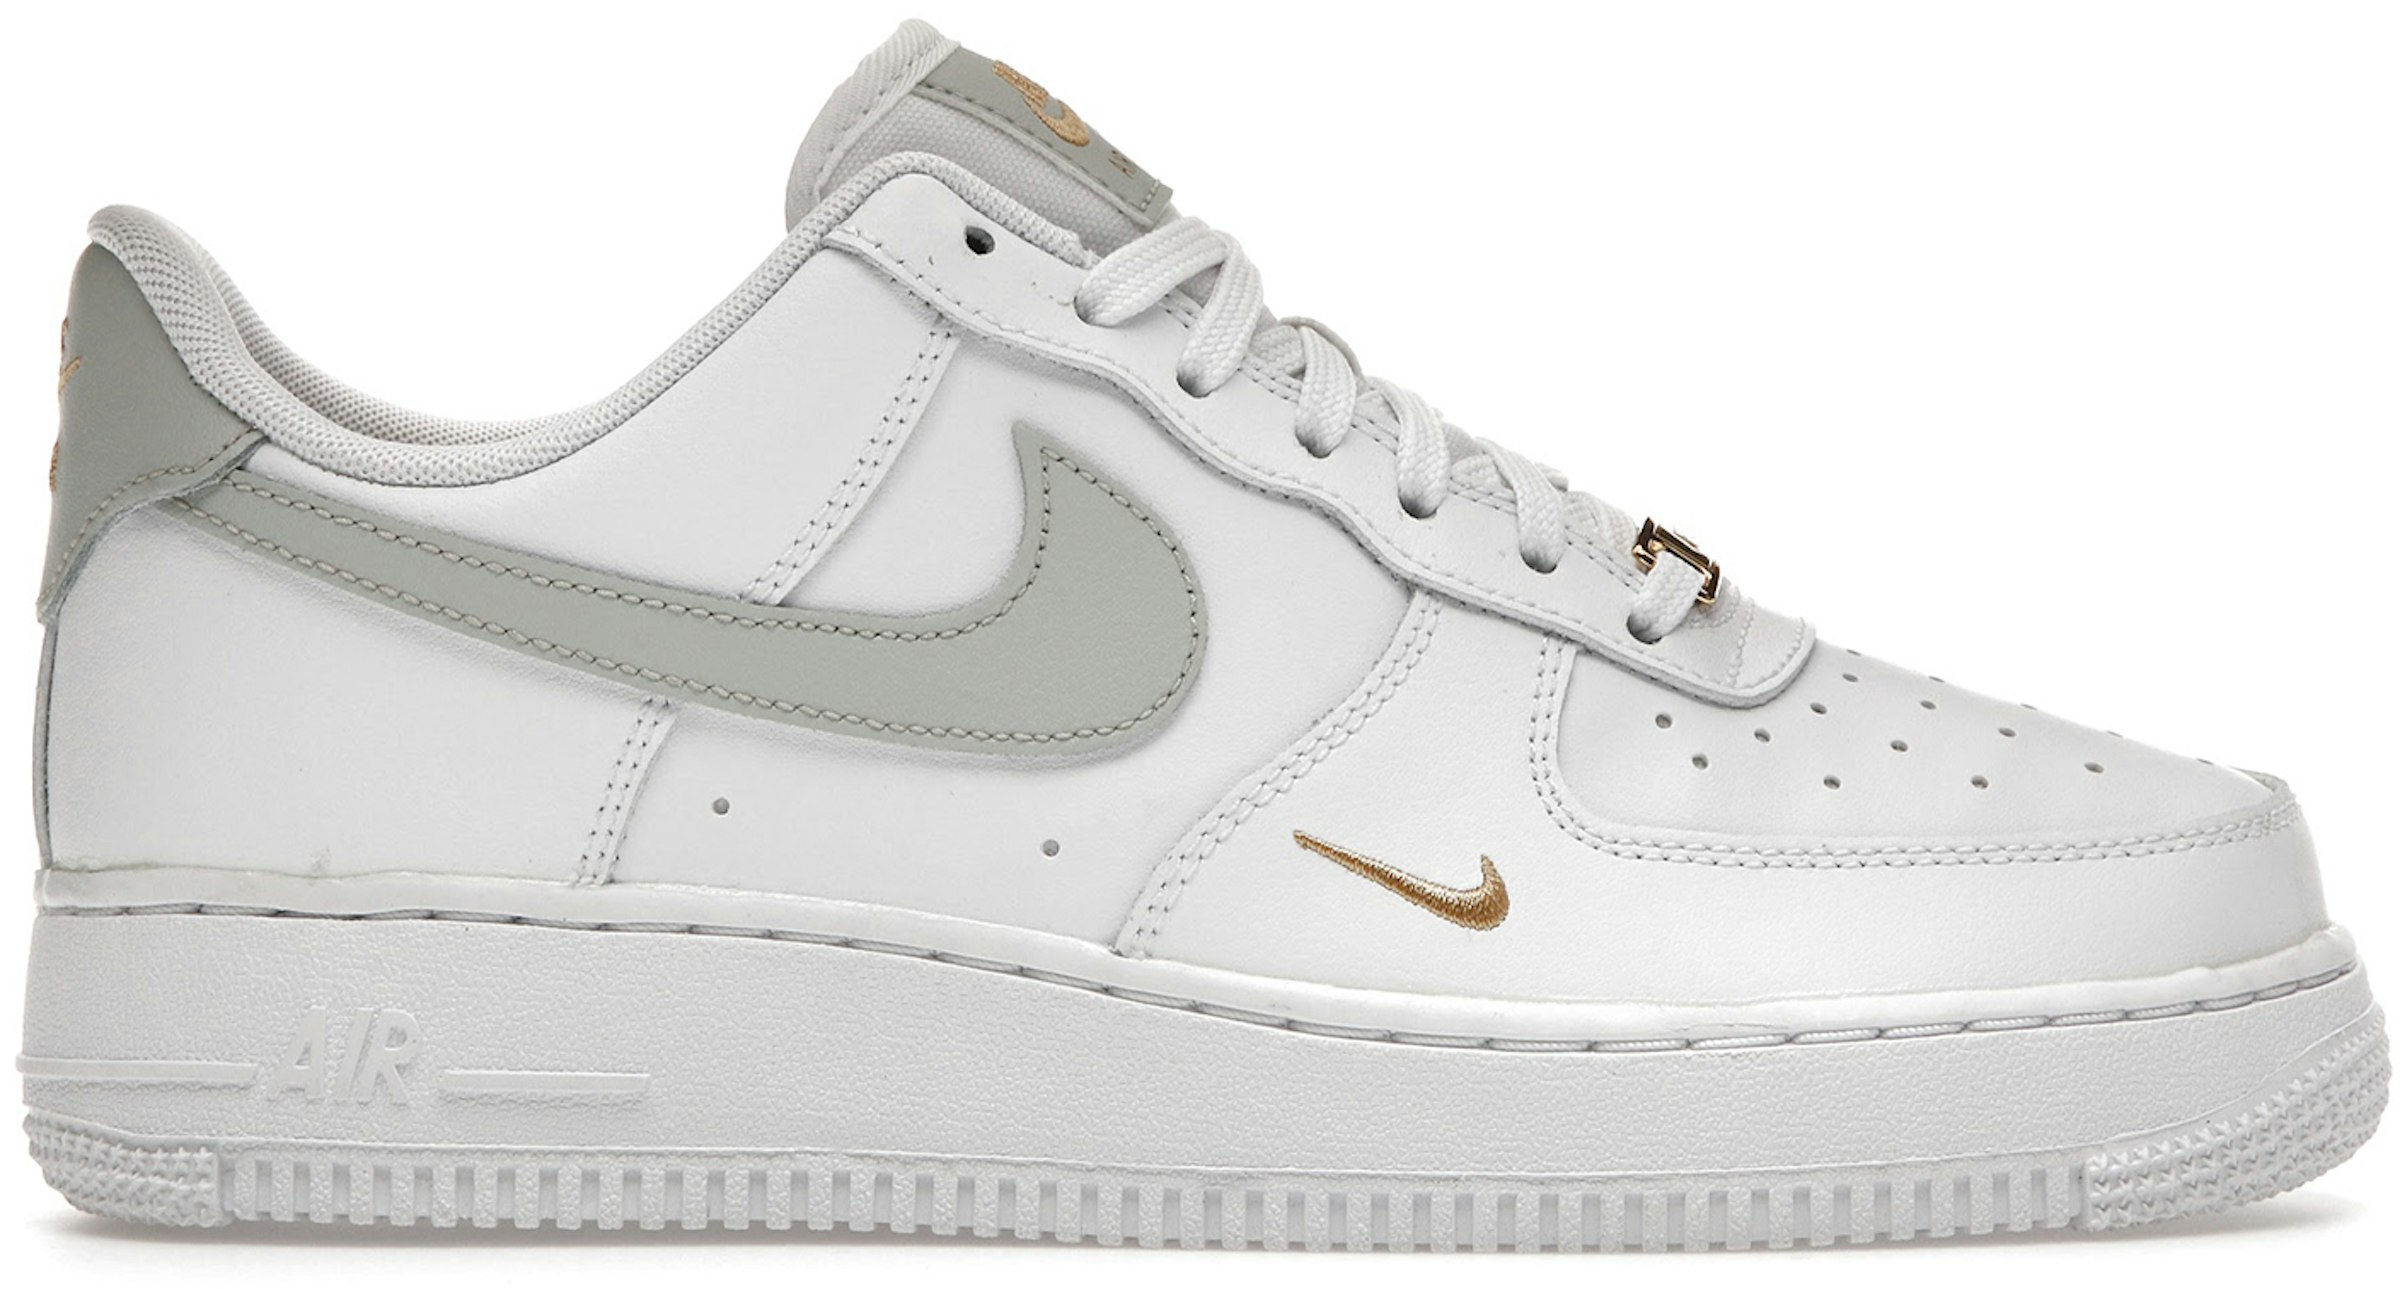 Air Force 1 Low White Grey Gold (Women's) - CZ0270-106 - US